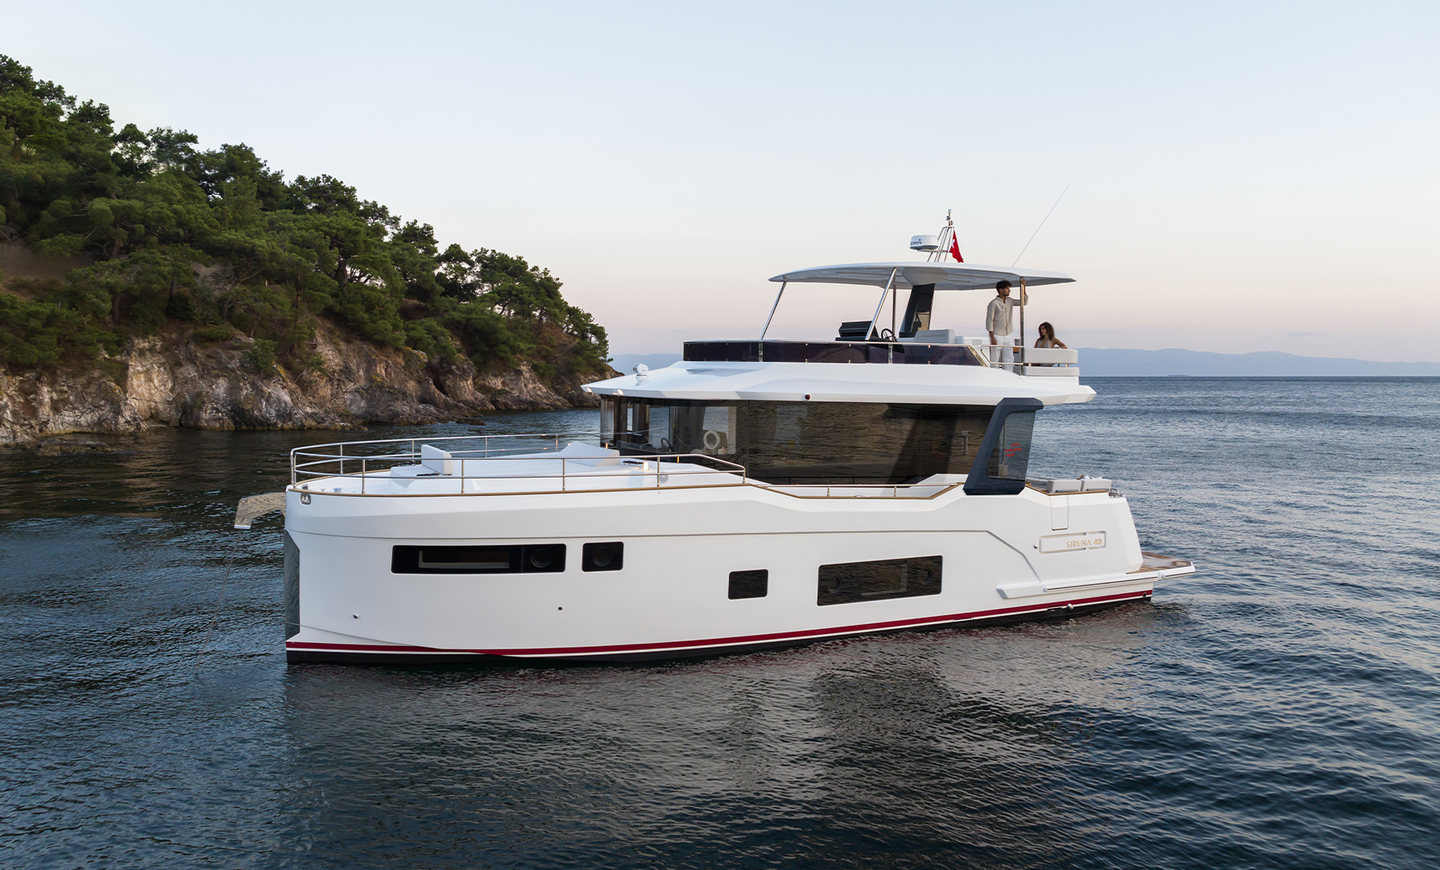 360 VR Virtual Tours of the Sirena 48